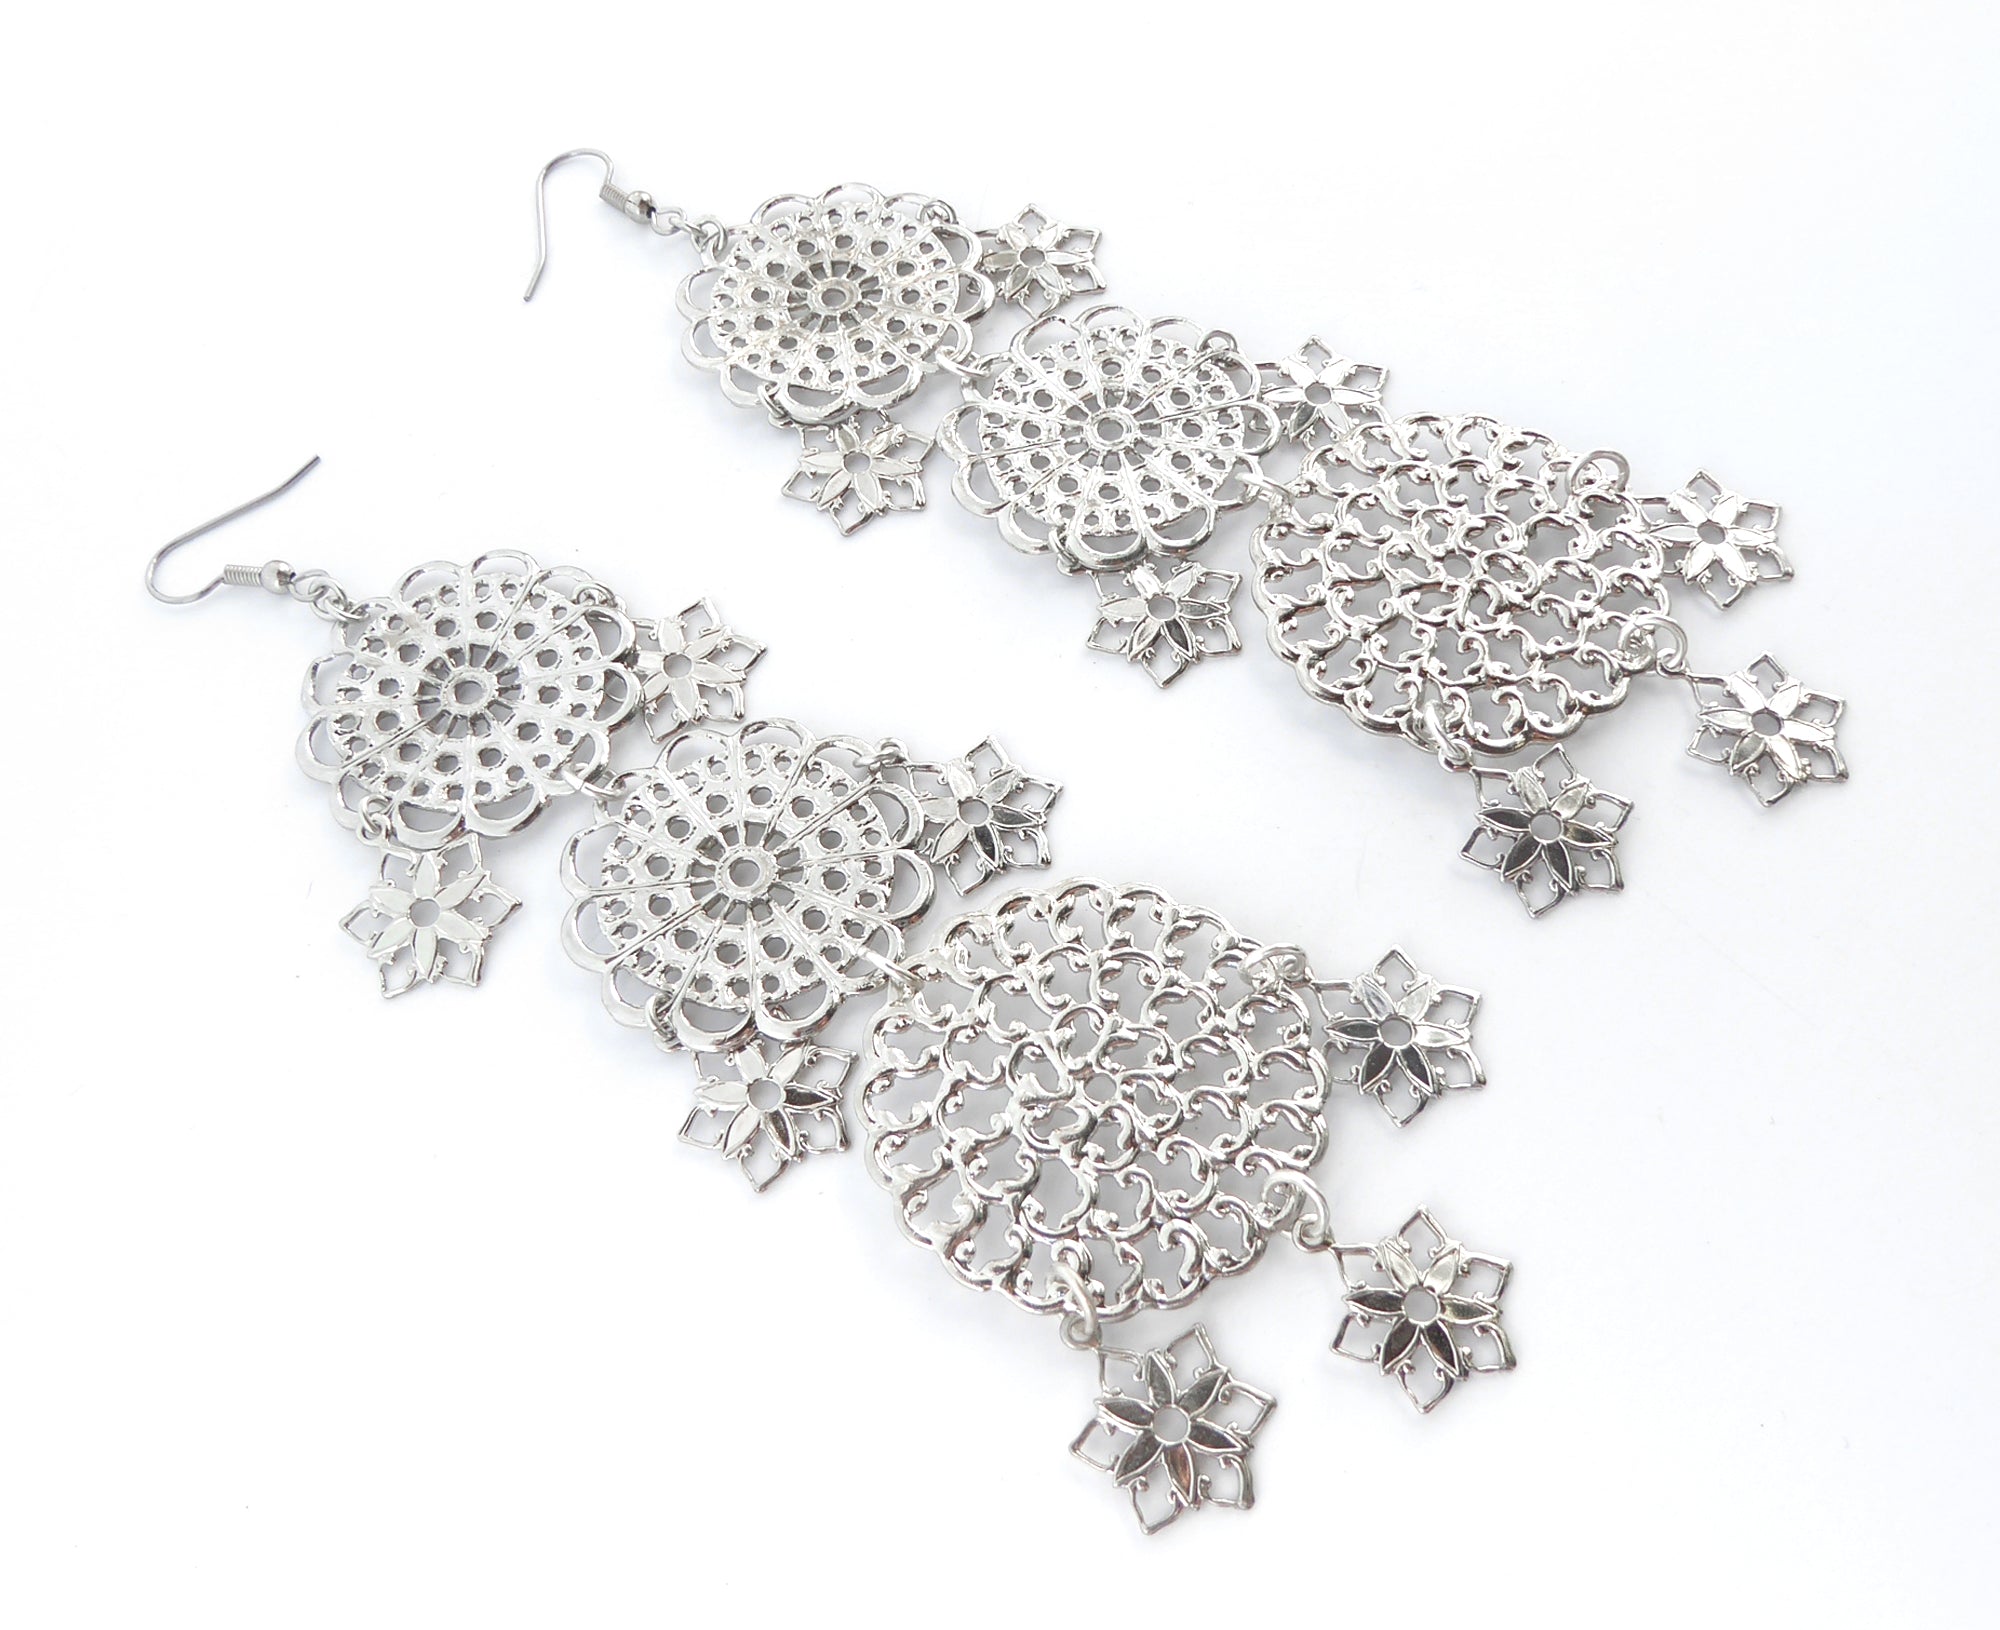 Silver round estrella earrings by Jenny Dayco 2